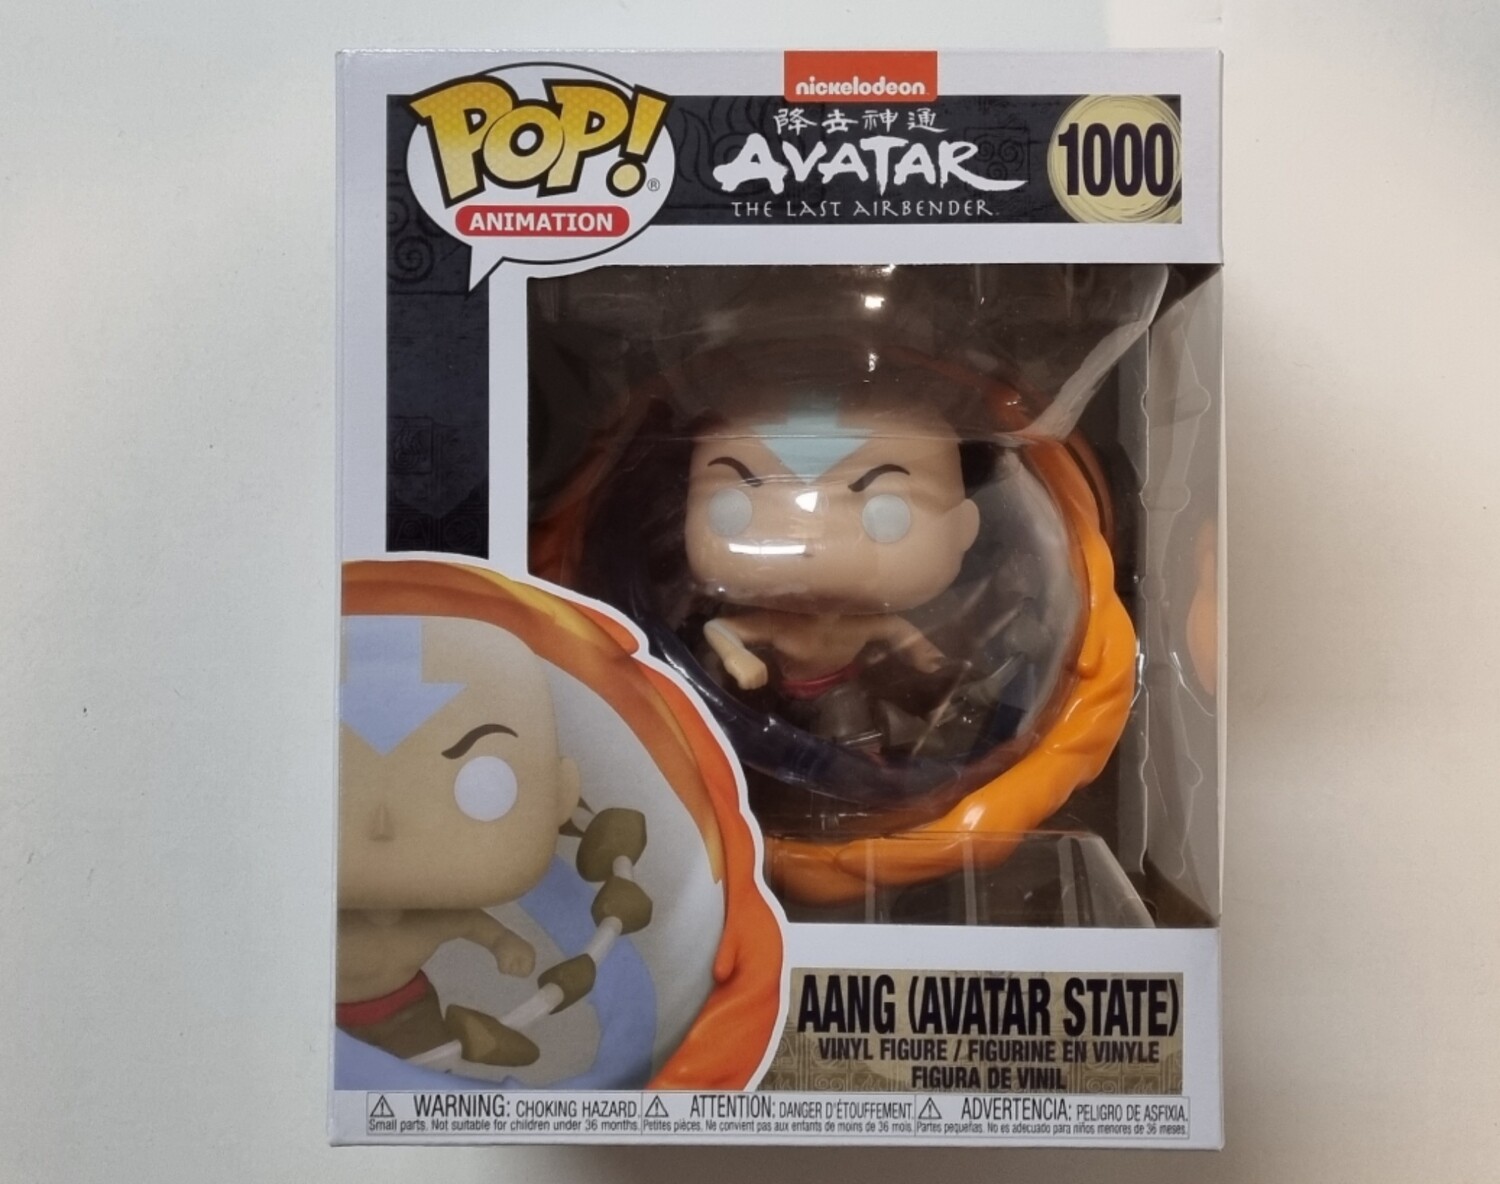 Funko Pop!, Aang (Avatar State), #1000, Animation, Avatar the Last Airbender